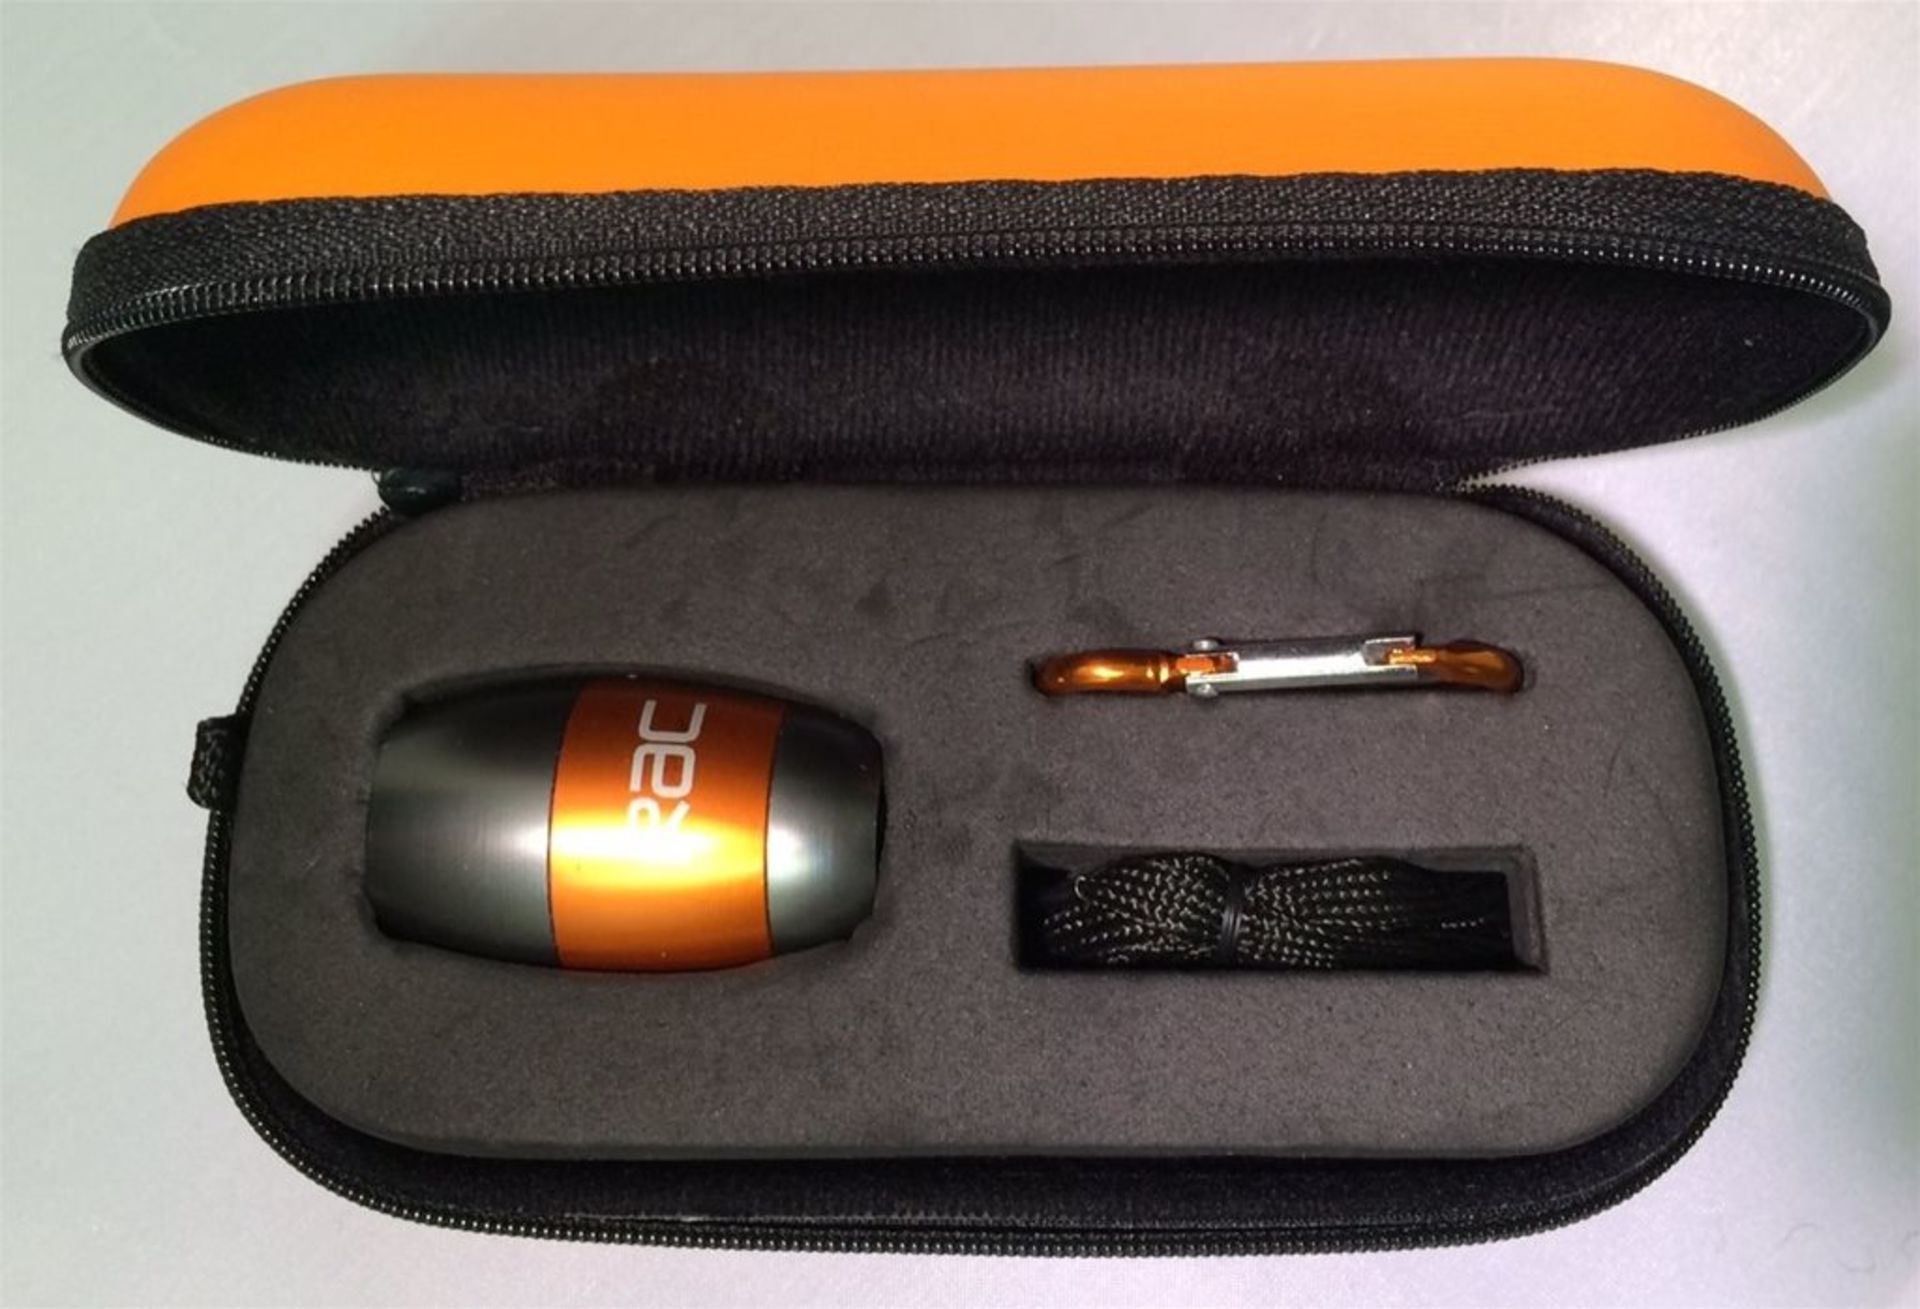 10 X Rac Aluminium Torch With 6 Extra Bright Led'S Inc Batteries And Case - Image 2 of 4